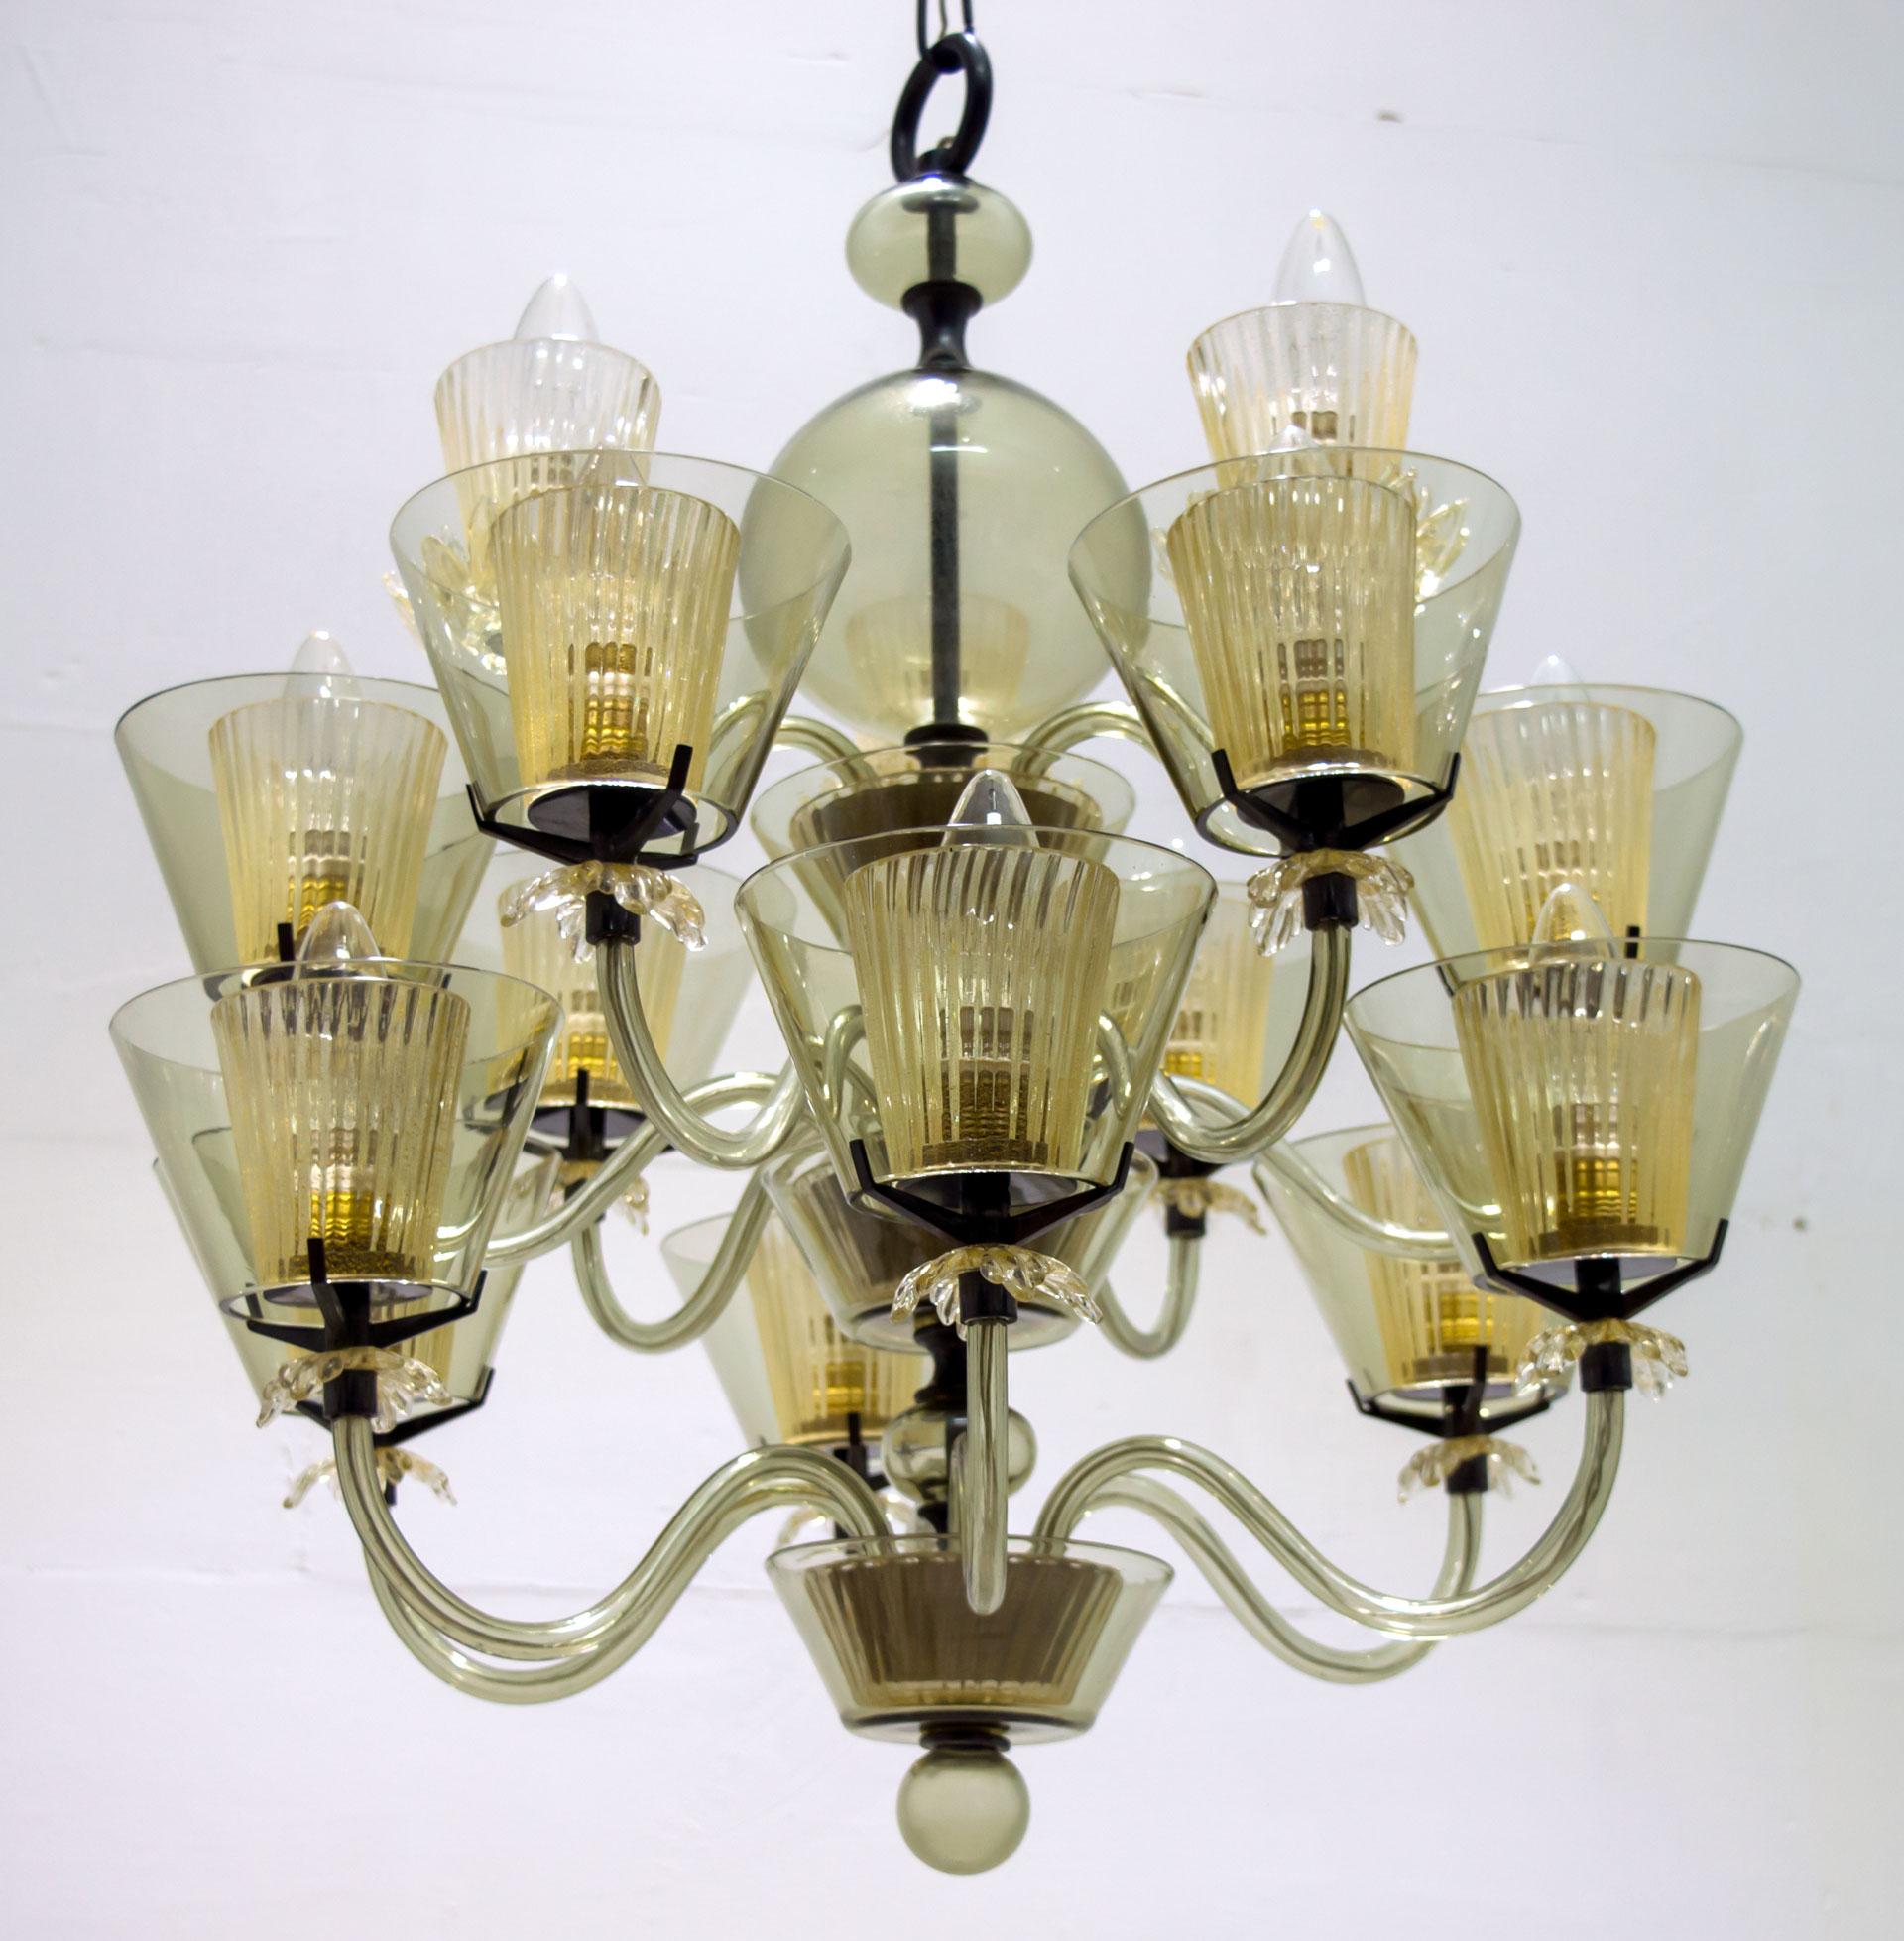 Colonial Murano glass chandelier by Seguso Vetri d'Arte. Handmade smoked Murano glass, blown in an elegant and refined shape inspired by midcentury drawings, which captures the essence of Seguso. Small gold spots float through the transparent glass